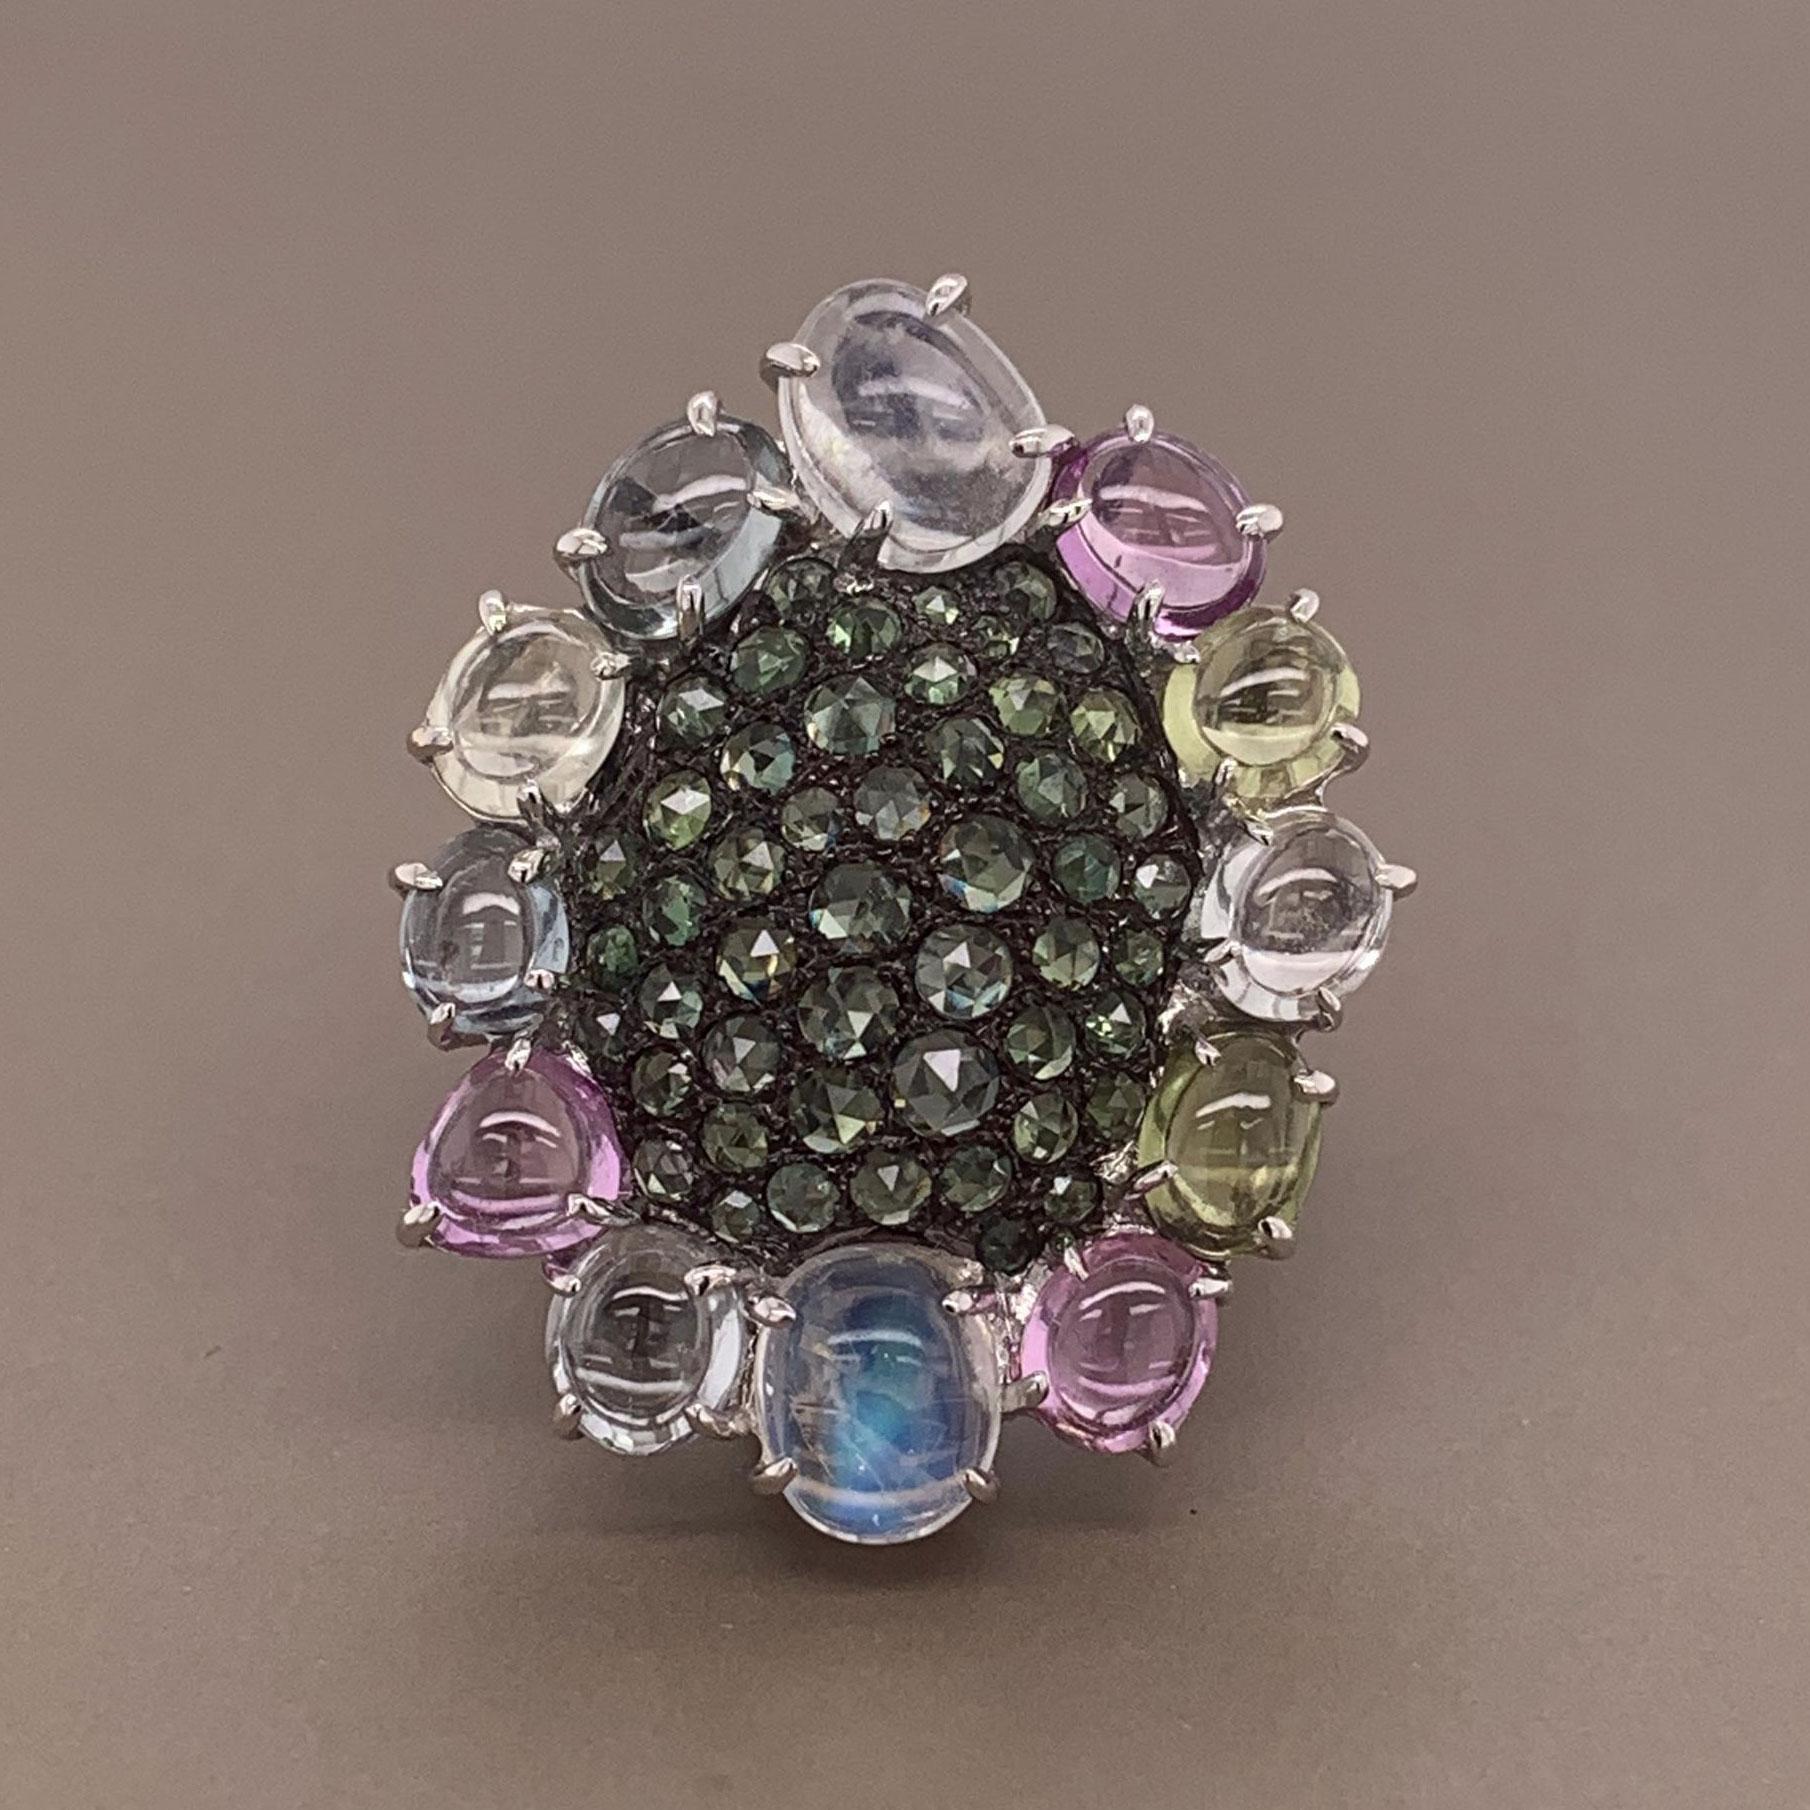 A fun multi-color cocktail ring featuring sapphires, diamonds and moonstones. There are 11.82 carats of sapphire and moonstone cut as large cabochons and smaller rose cuts in the center of the ring. They are complemented by 0.38 carats of round cut